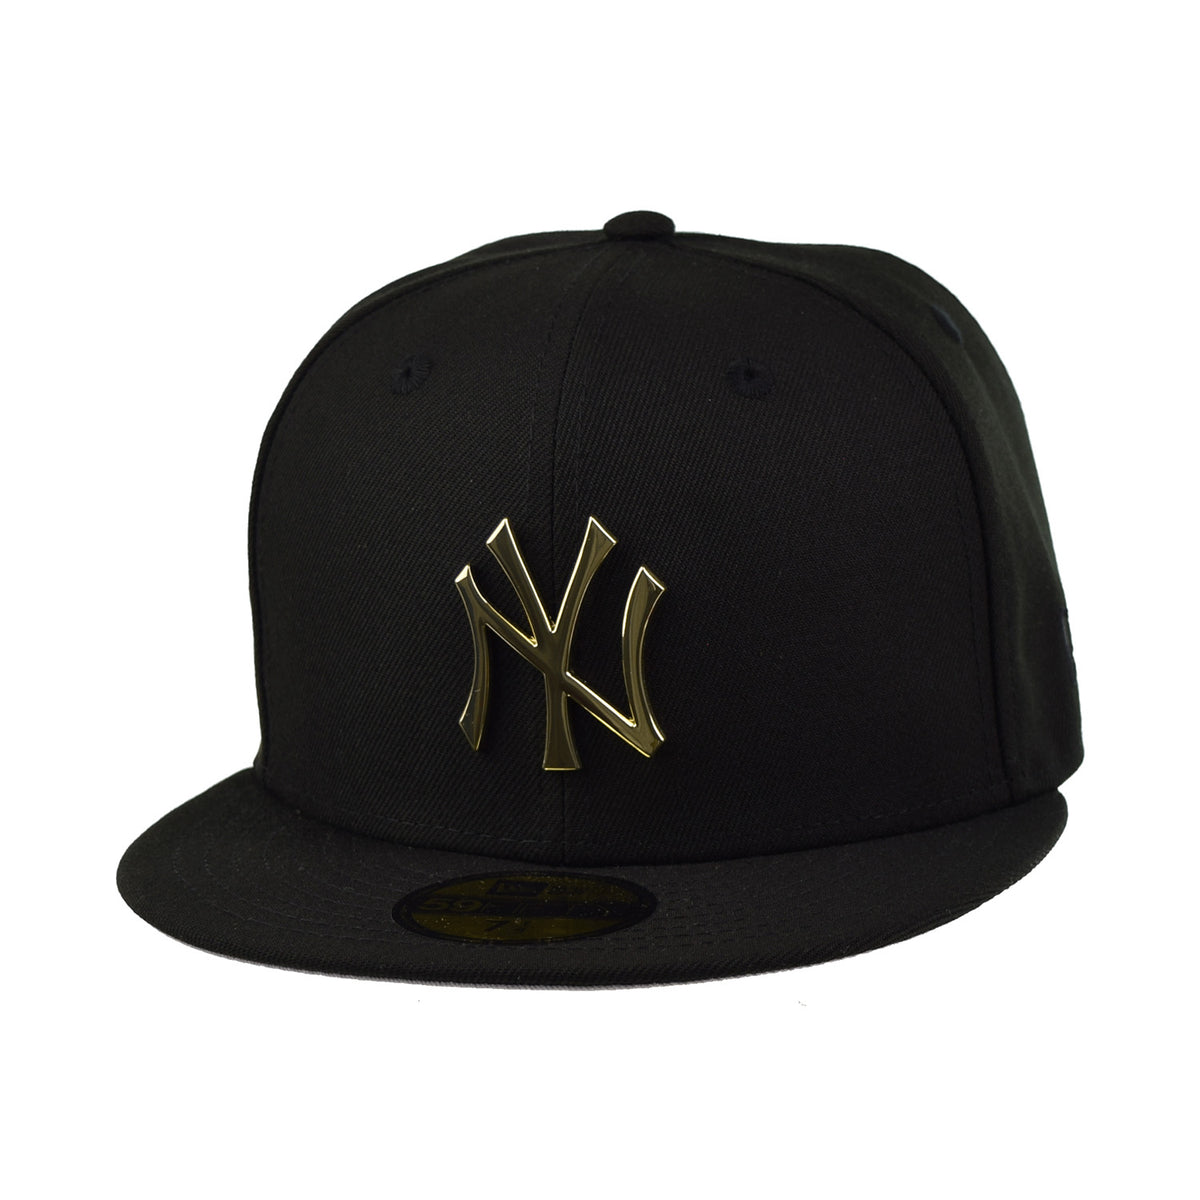 Men's New Era Black/Gold York Yankees 59FIFTY Fitted Hat